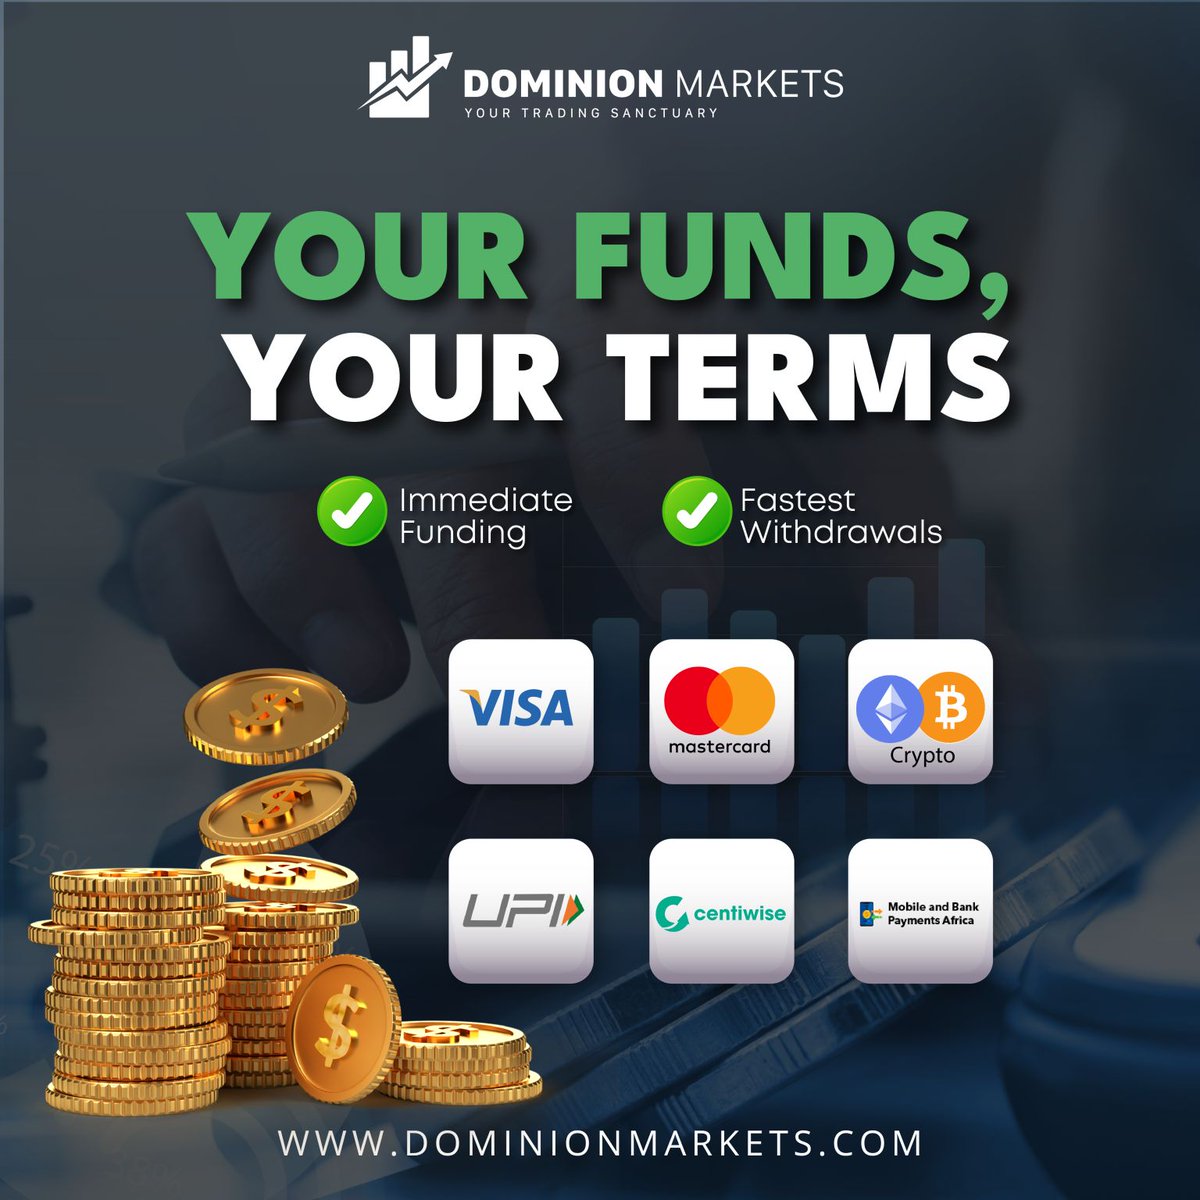 At Dominion Markets, you can choose from a variety of payment methods for both deposits and withdrawals. 💳💸

#DominionMarkets
#forextrading 
#PaymentSolutions